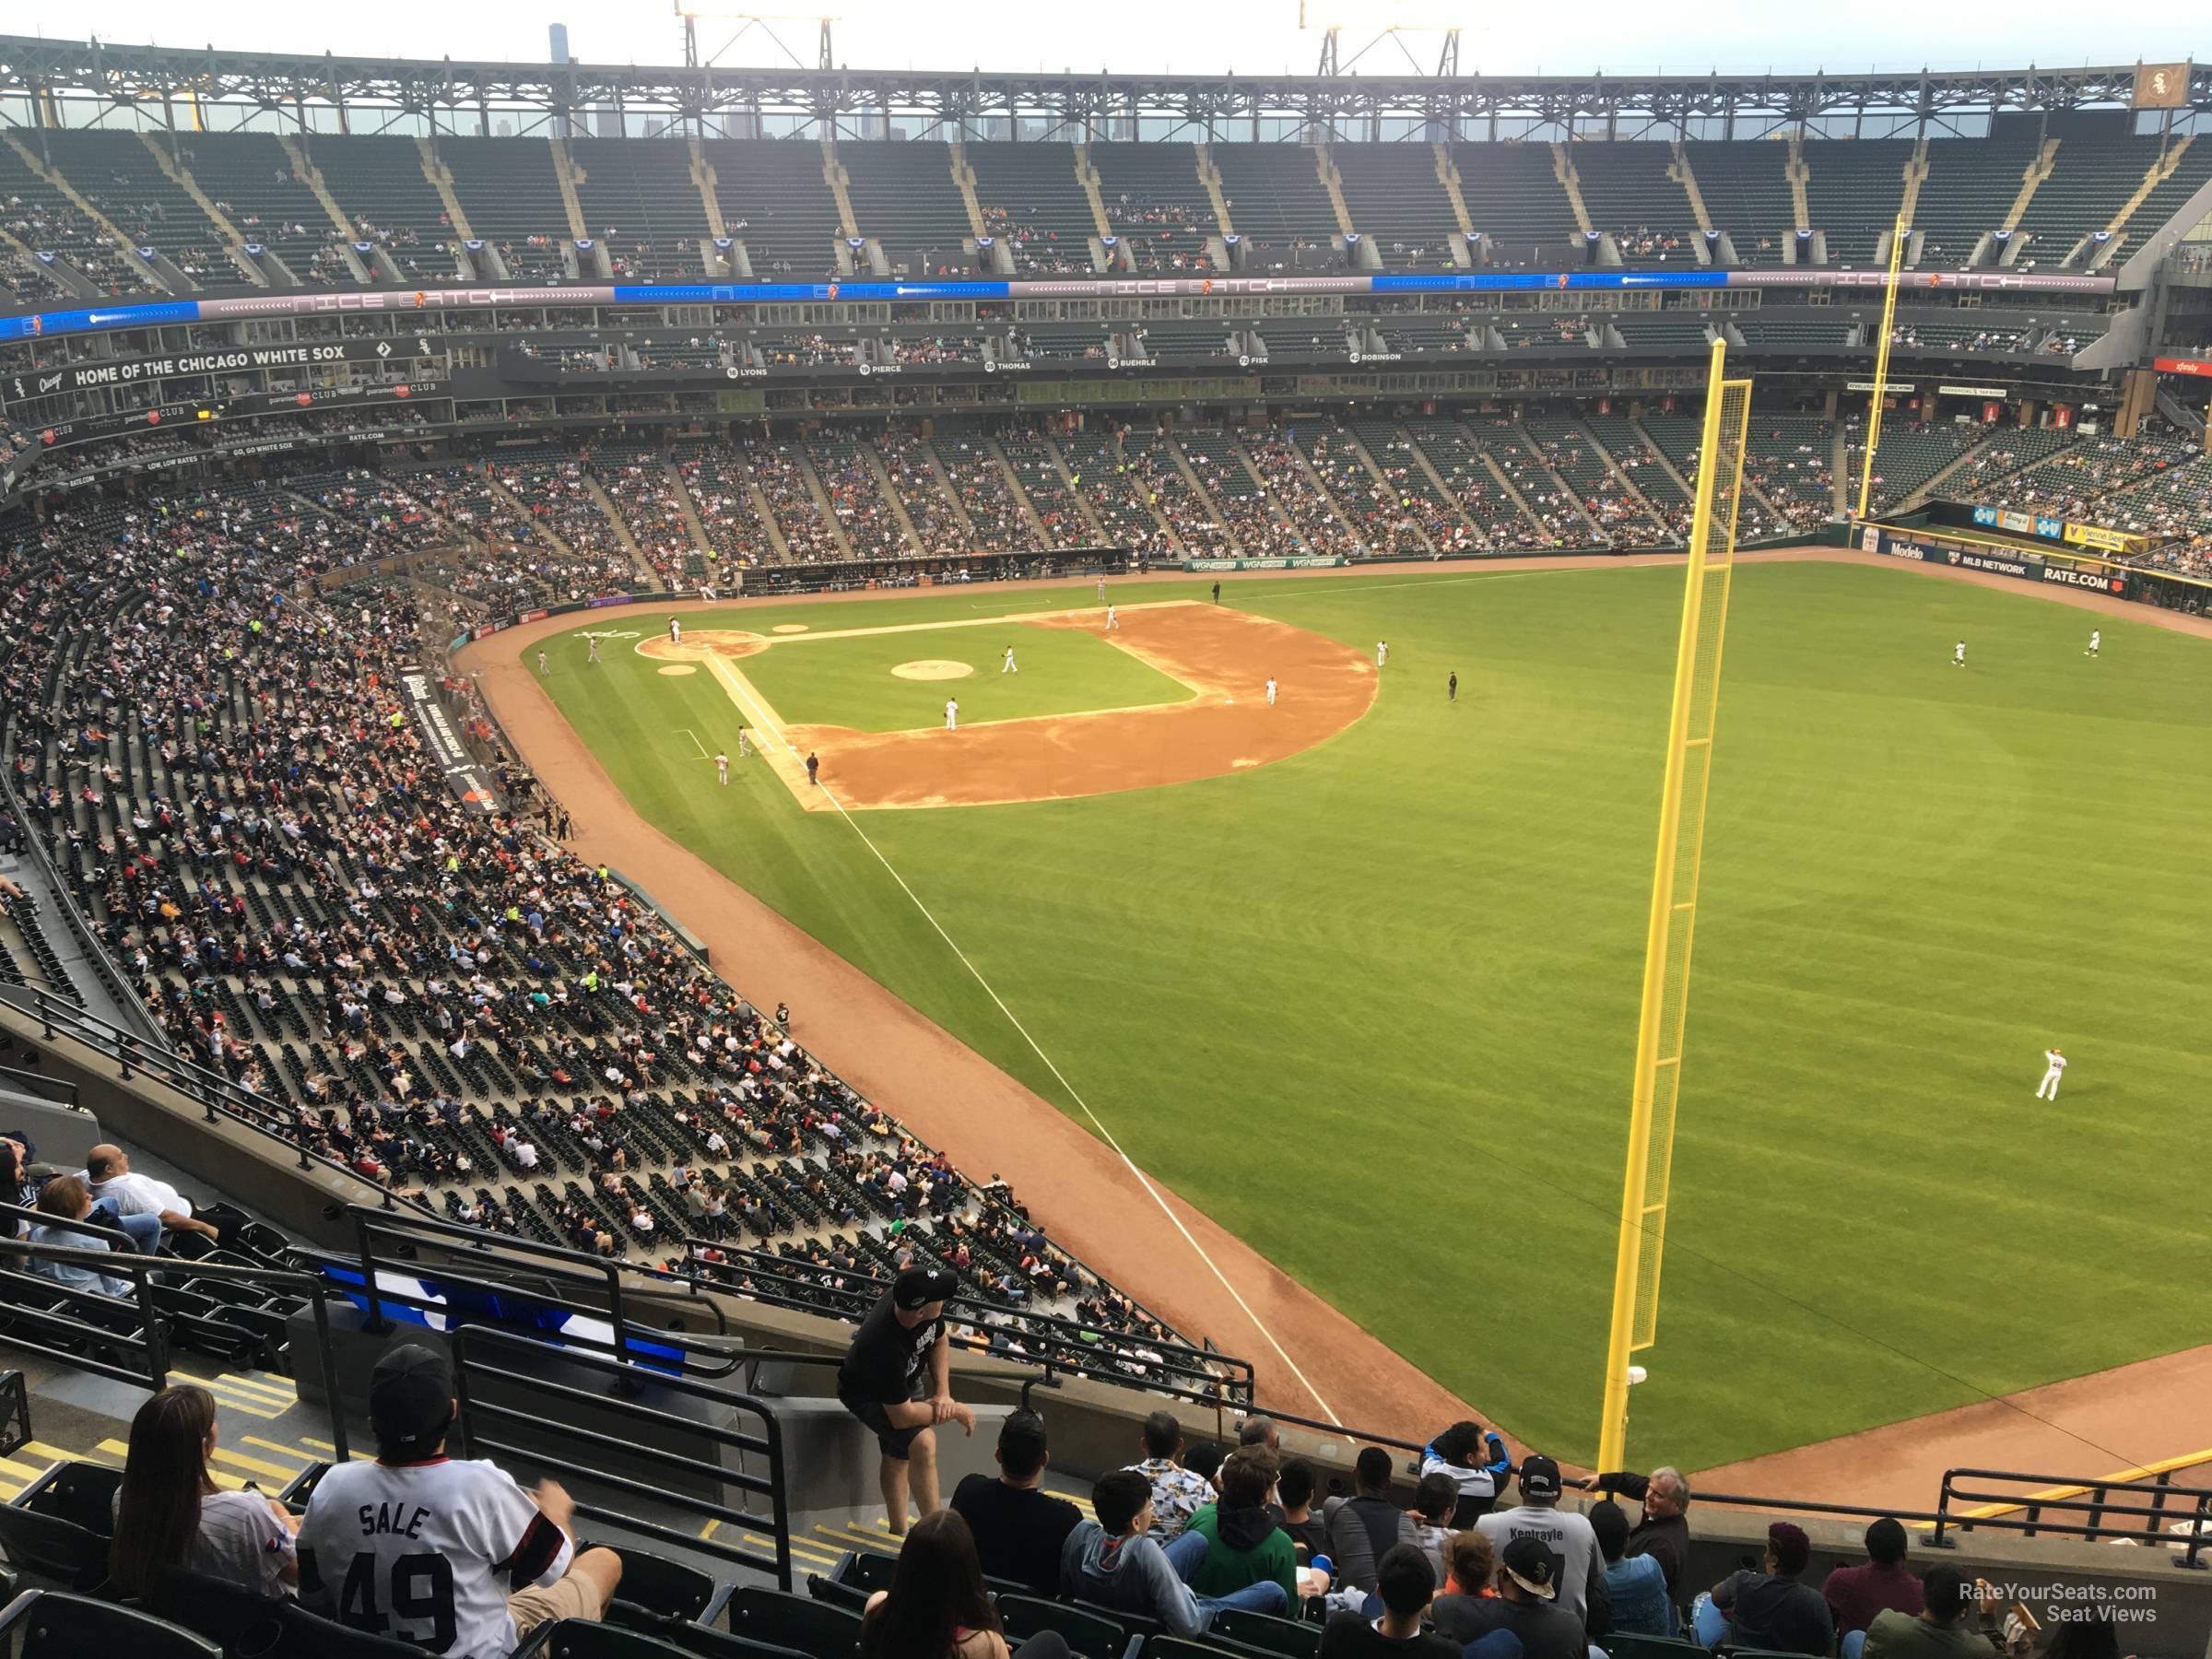 section 508, row 12 seat view  - guaranteed rate field